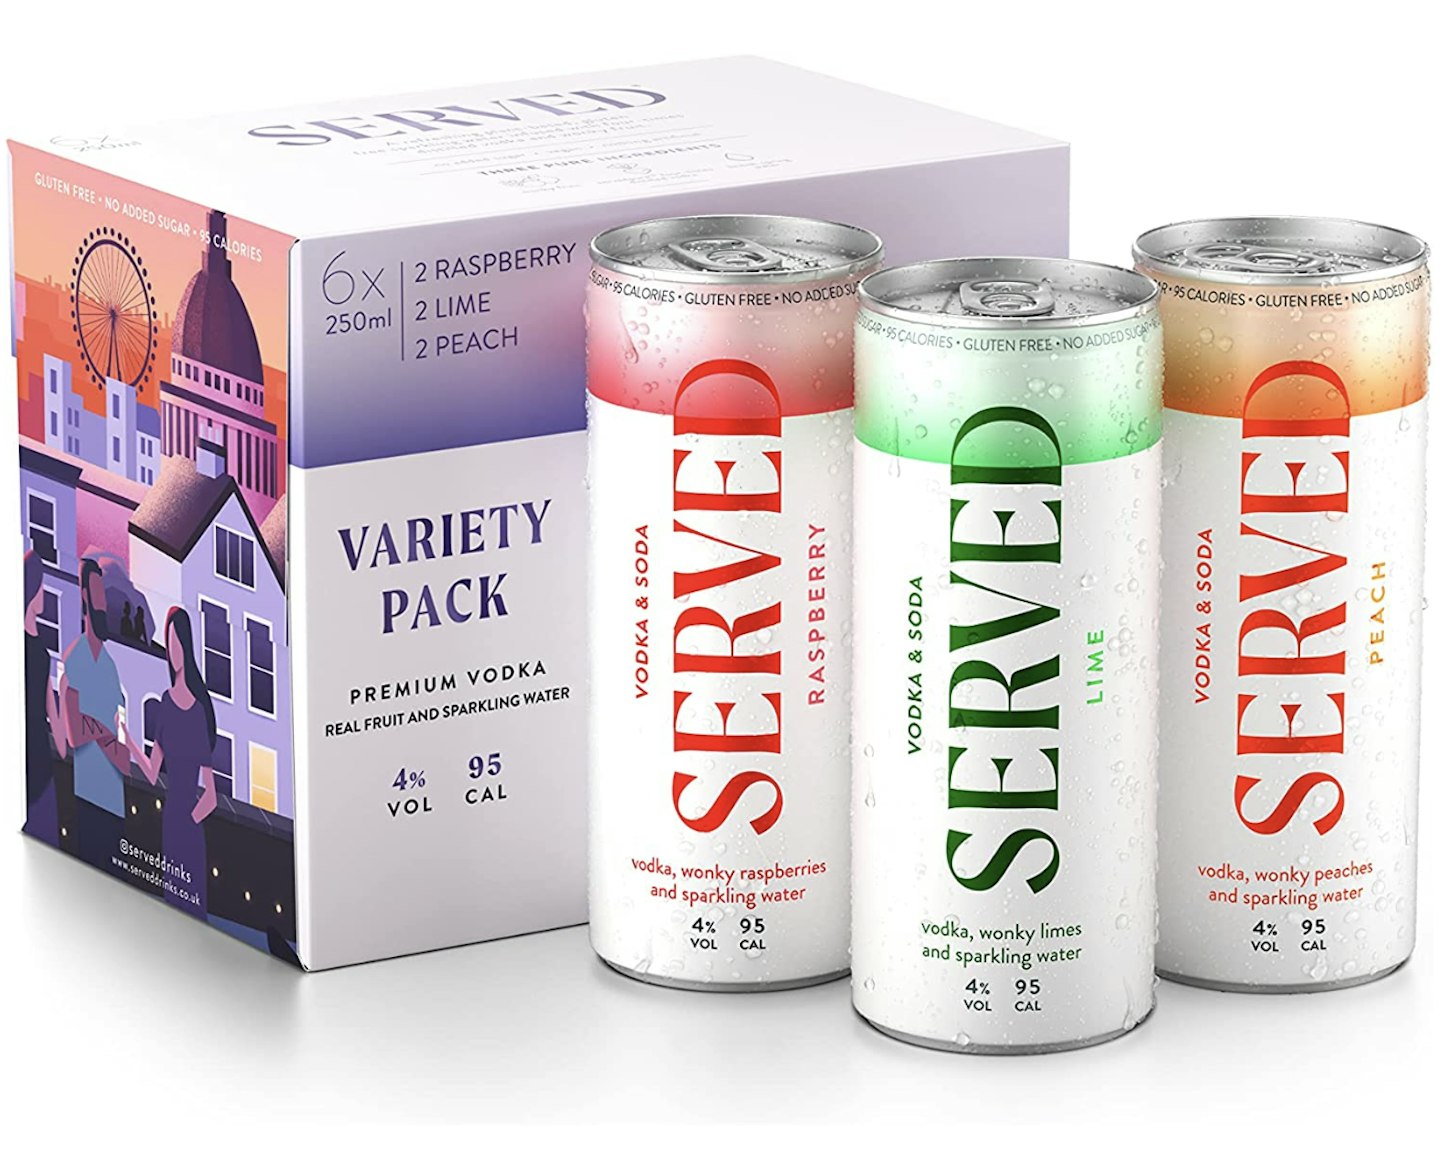 SERVED – Premium Vodka, Real Fruit & Soda Mixed Variety Pack